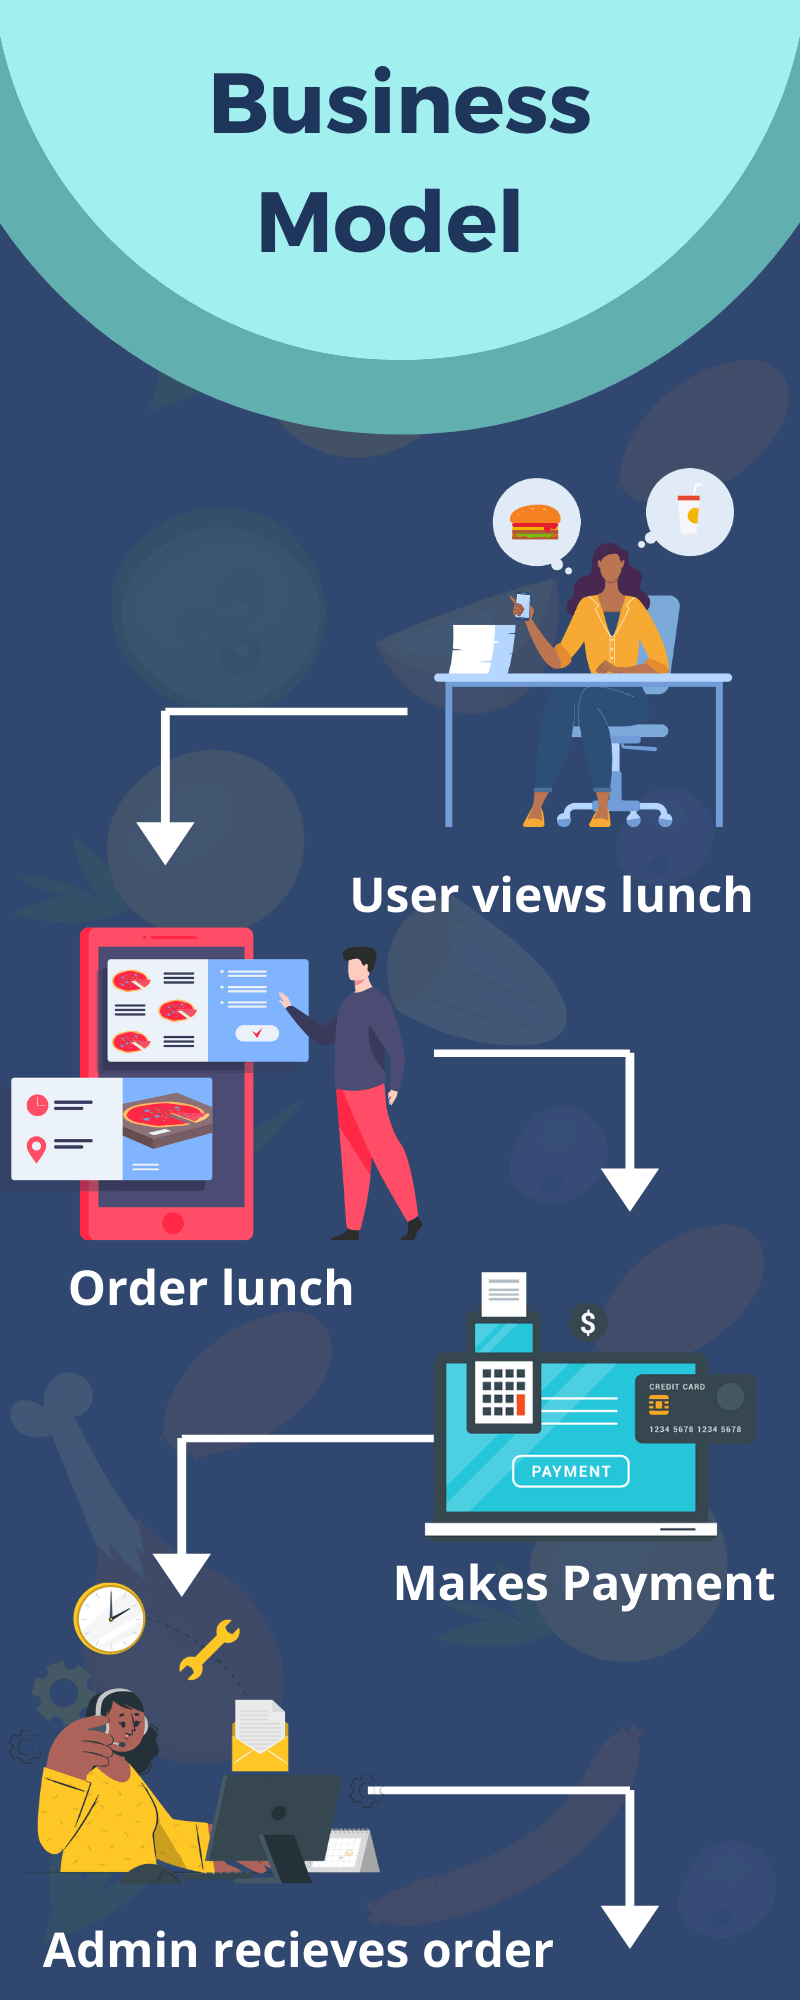 business model of lunch box delivery